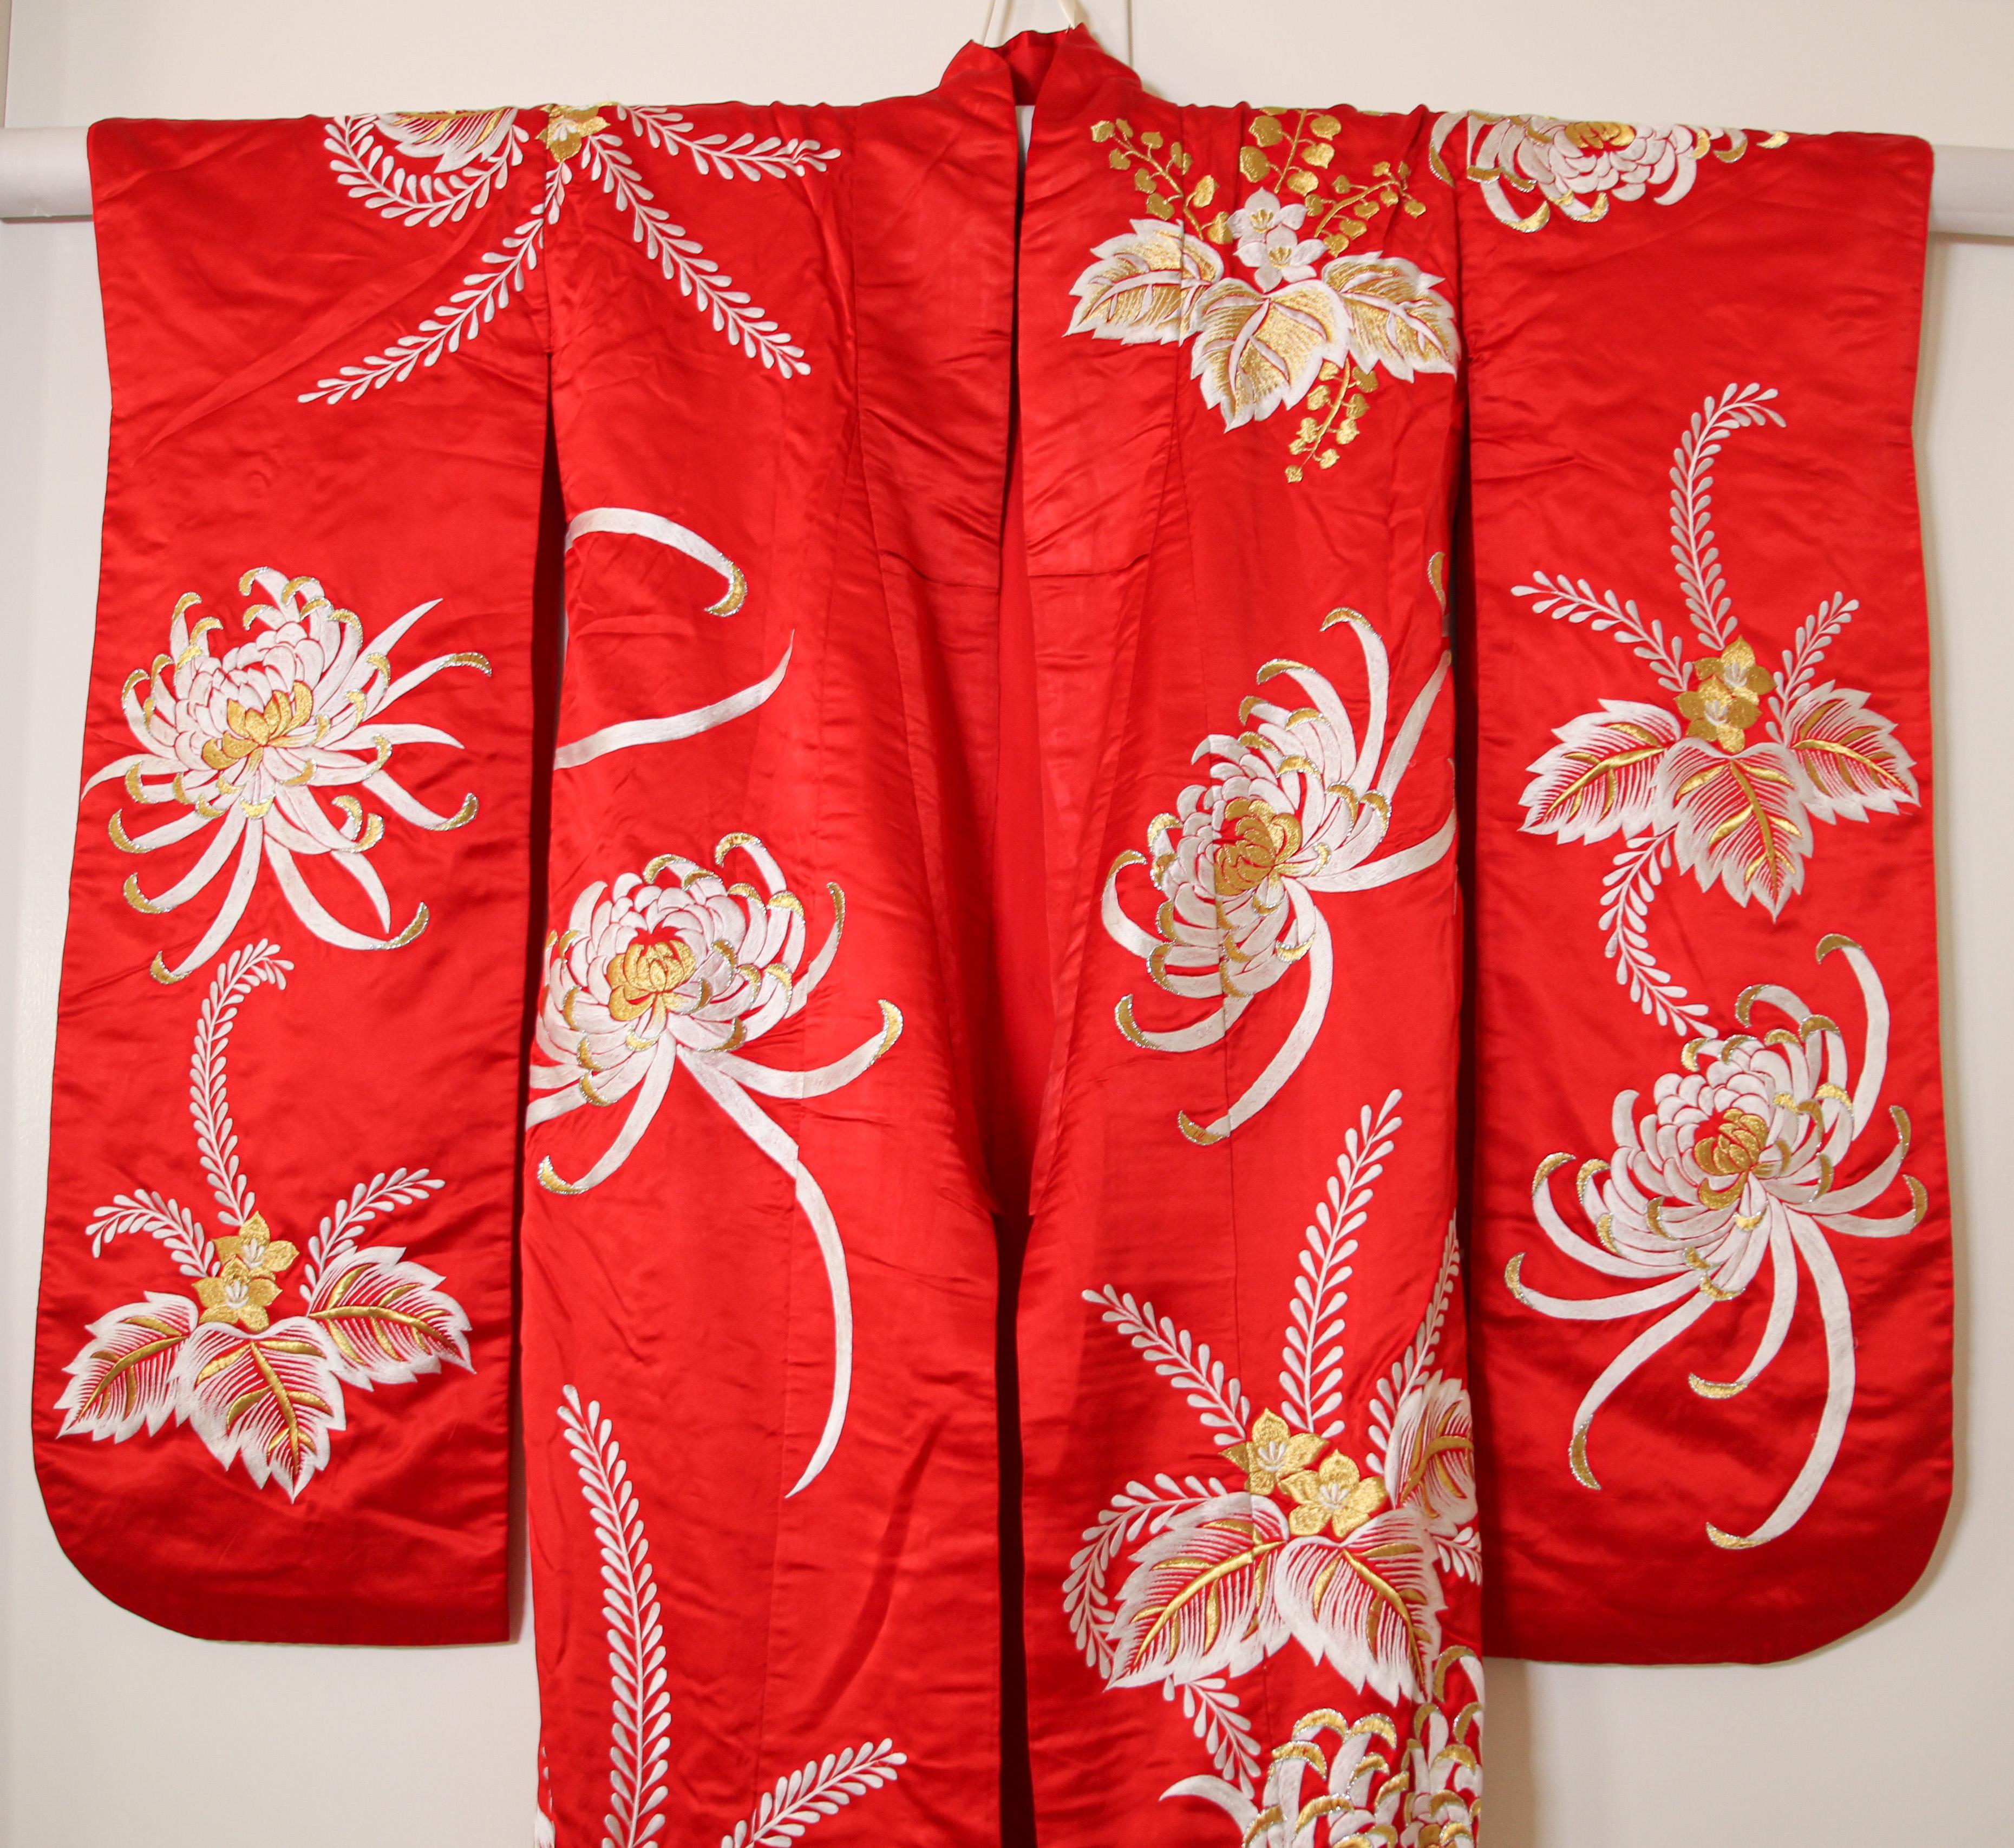 Vintage Red Kimono Silk Brocade Japanese Ceremonial Gown In Good Condition For Sale In North Hollywood, CA